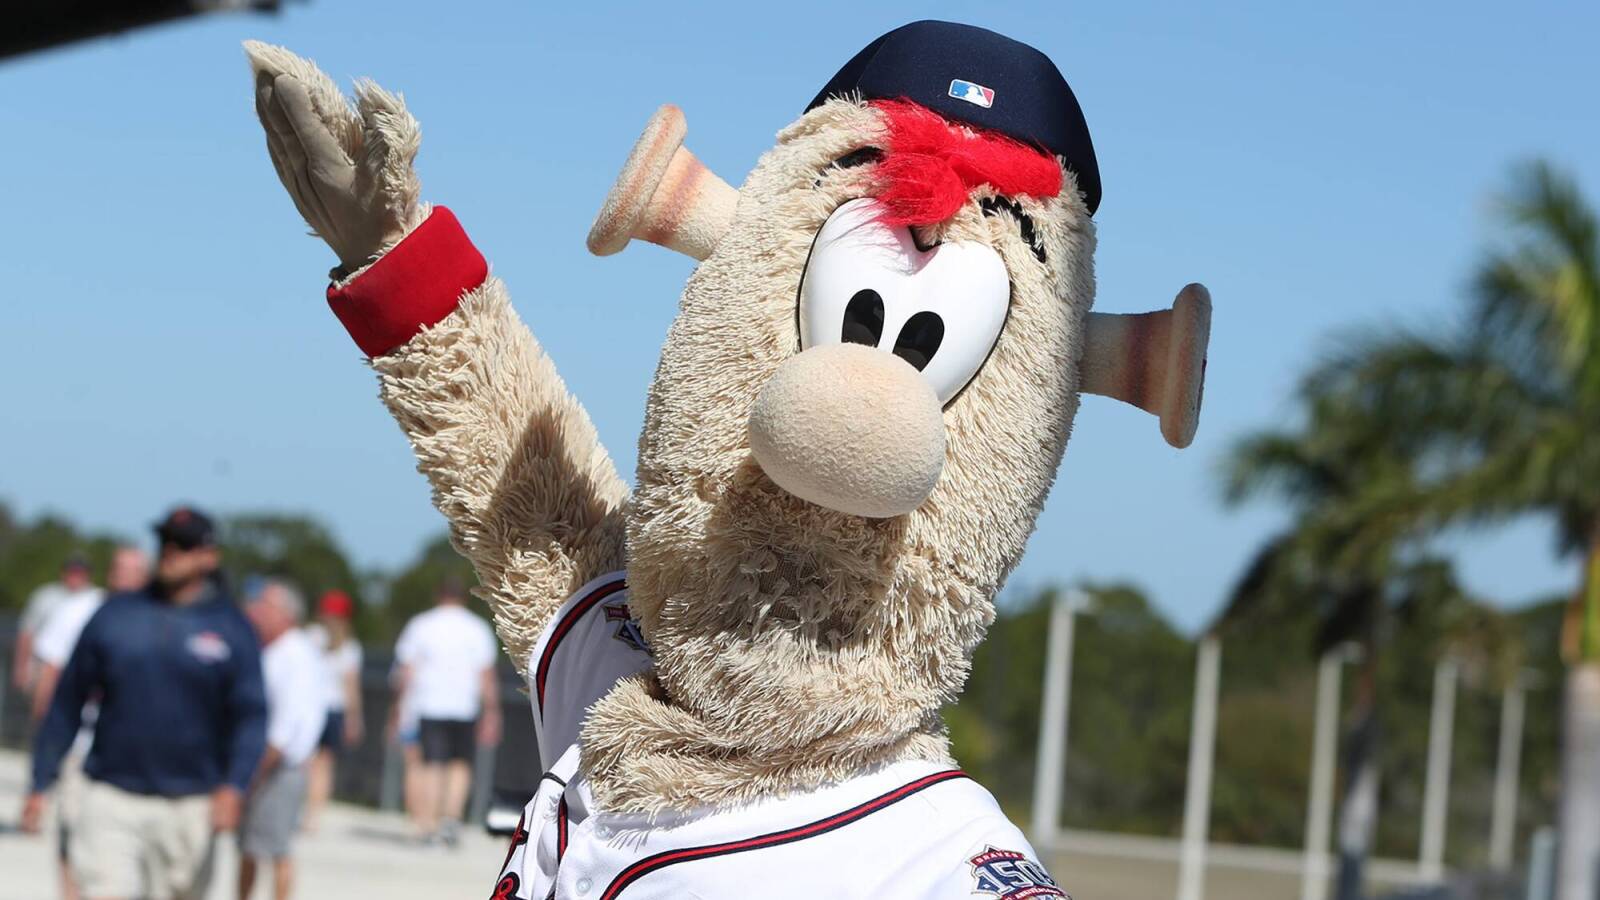 Watch: Braves mascot Blooper runs over youth football player